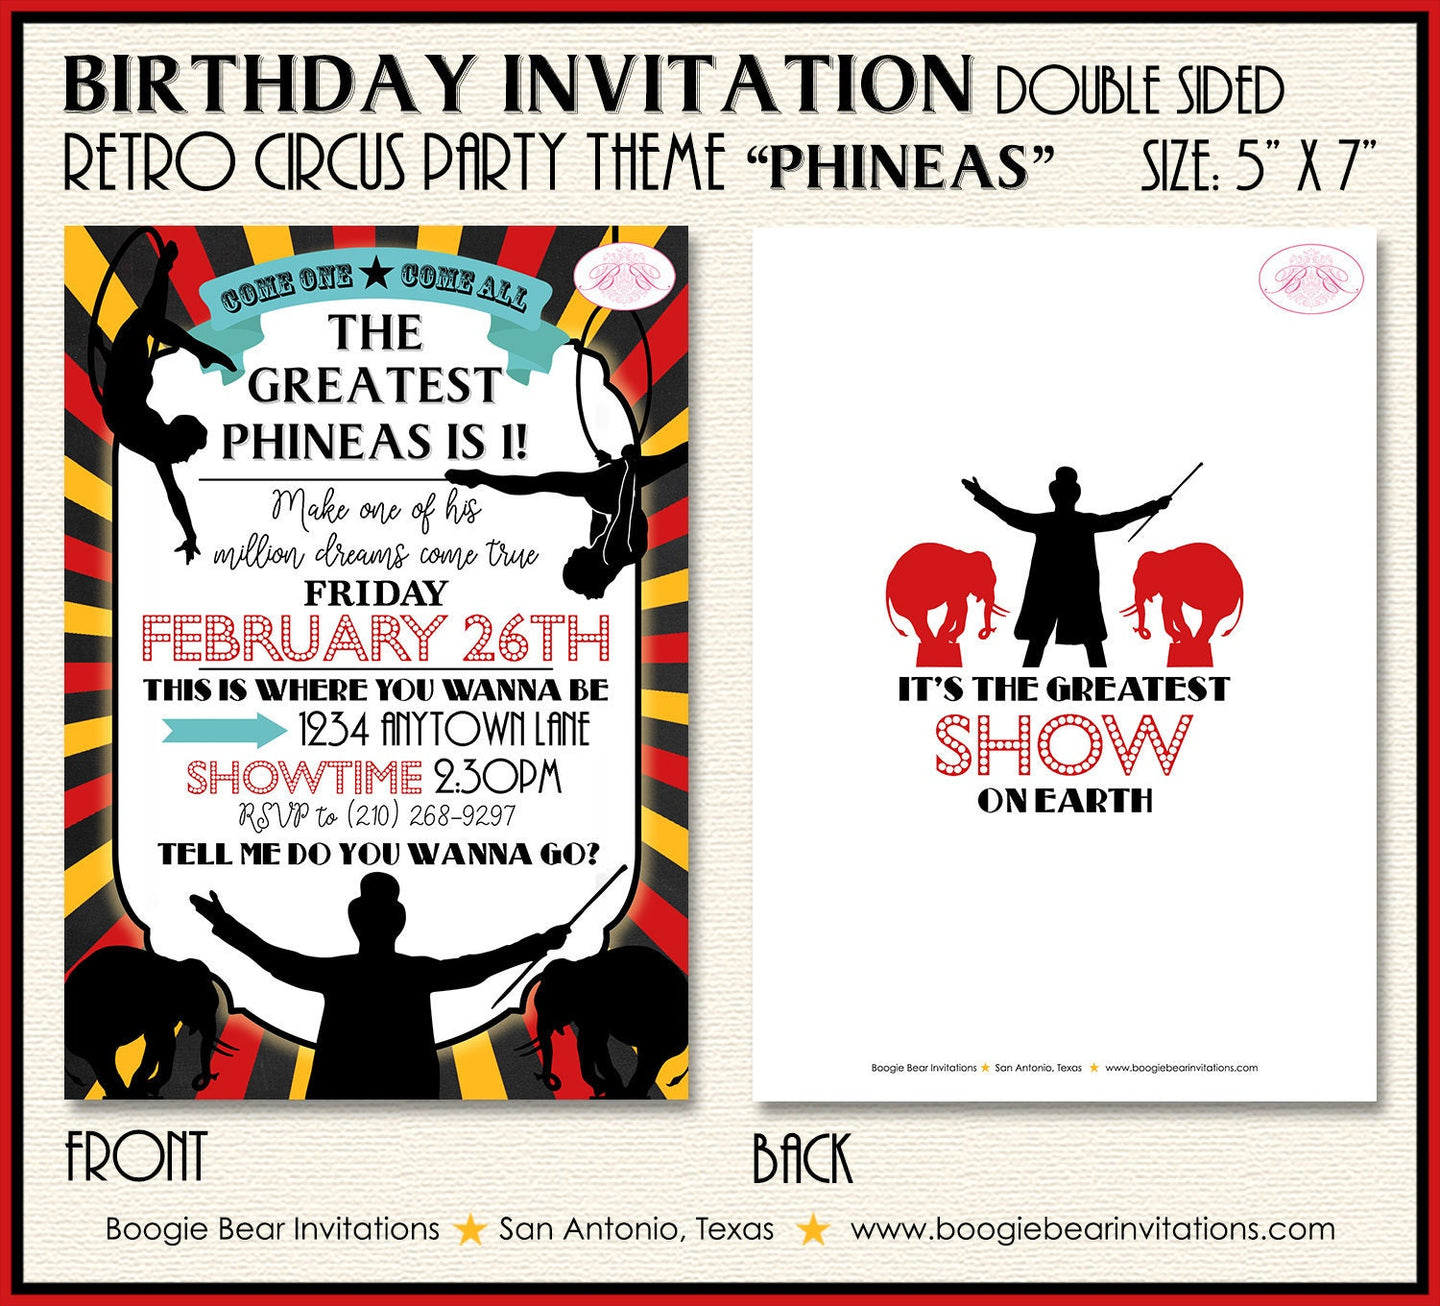 Circus Showman Birthday Party Invitation Animals Boy Girl Trapeze Acrobat Boogie Bear Invitations Phineas Theme Paperless Printable Printed